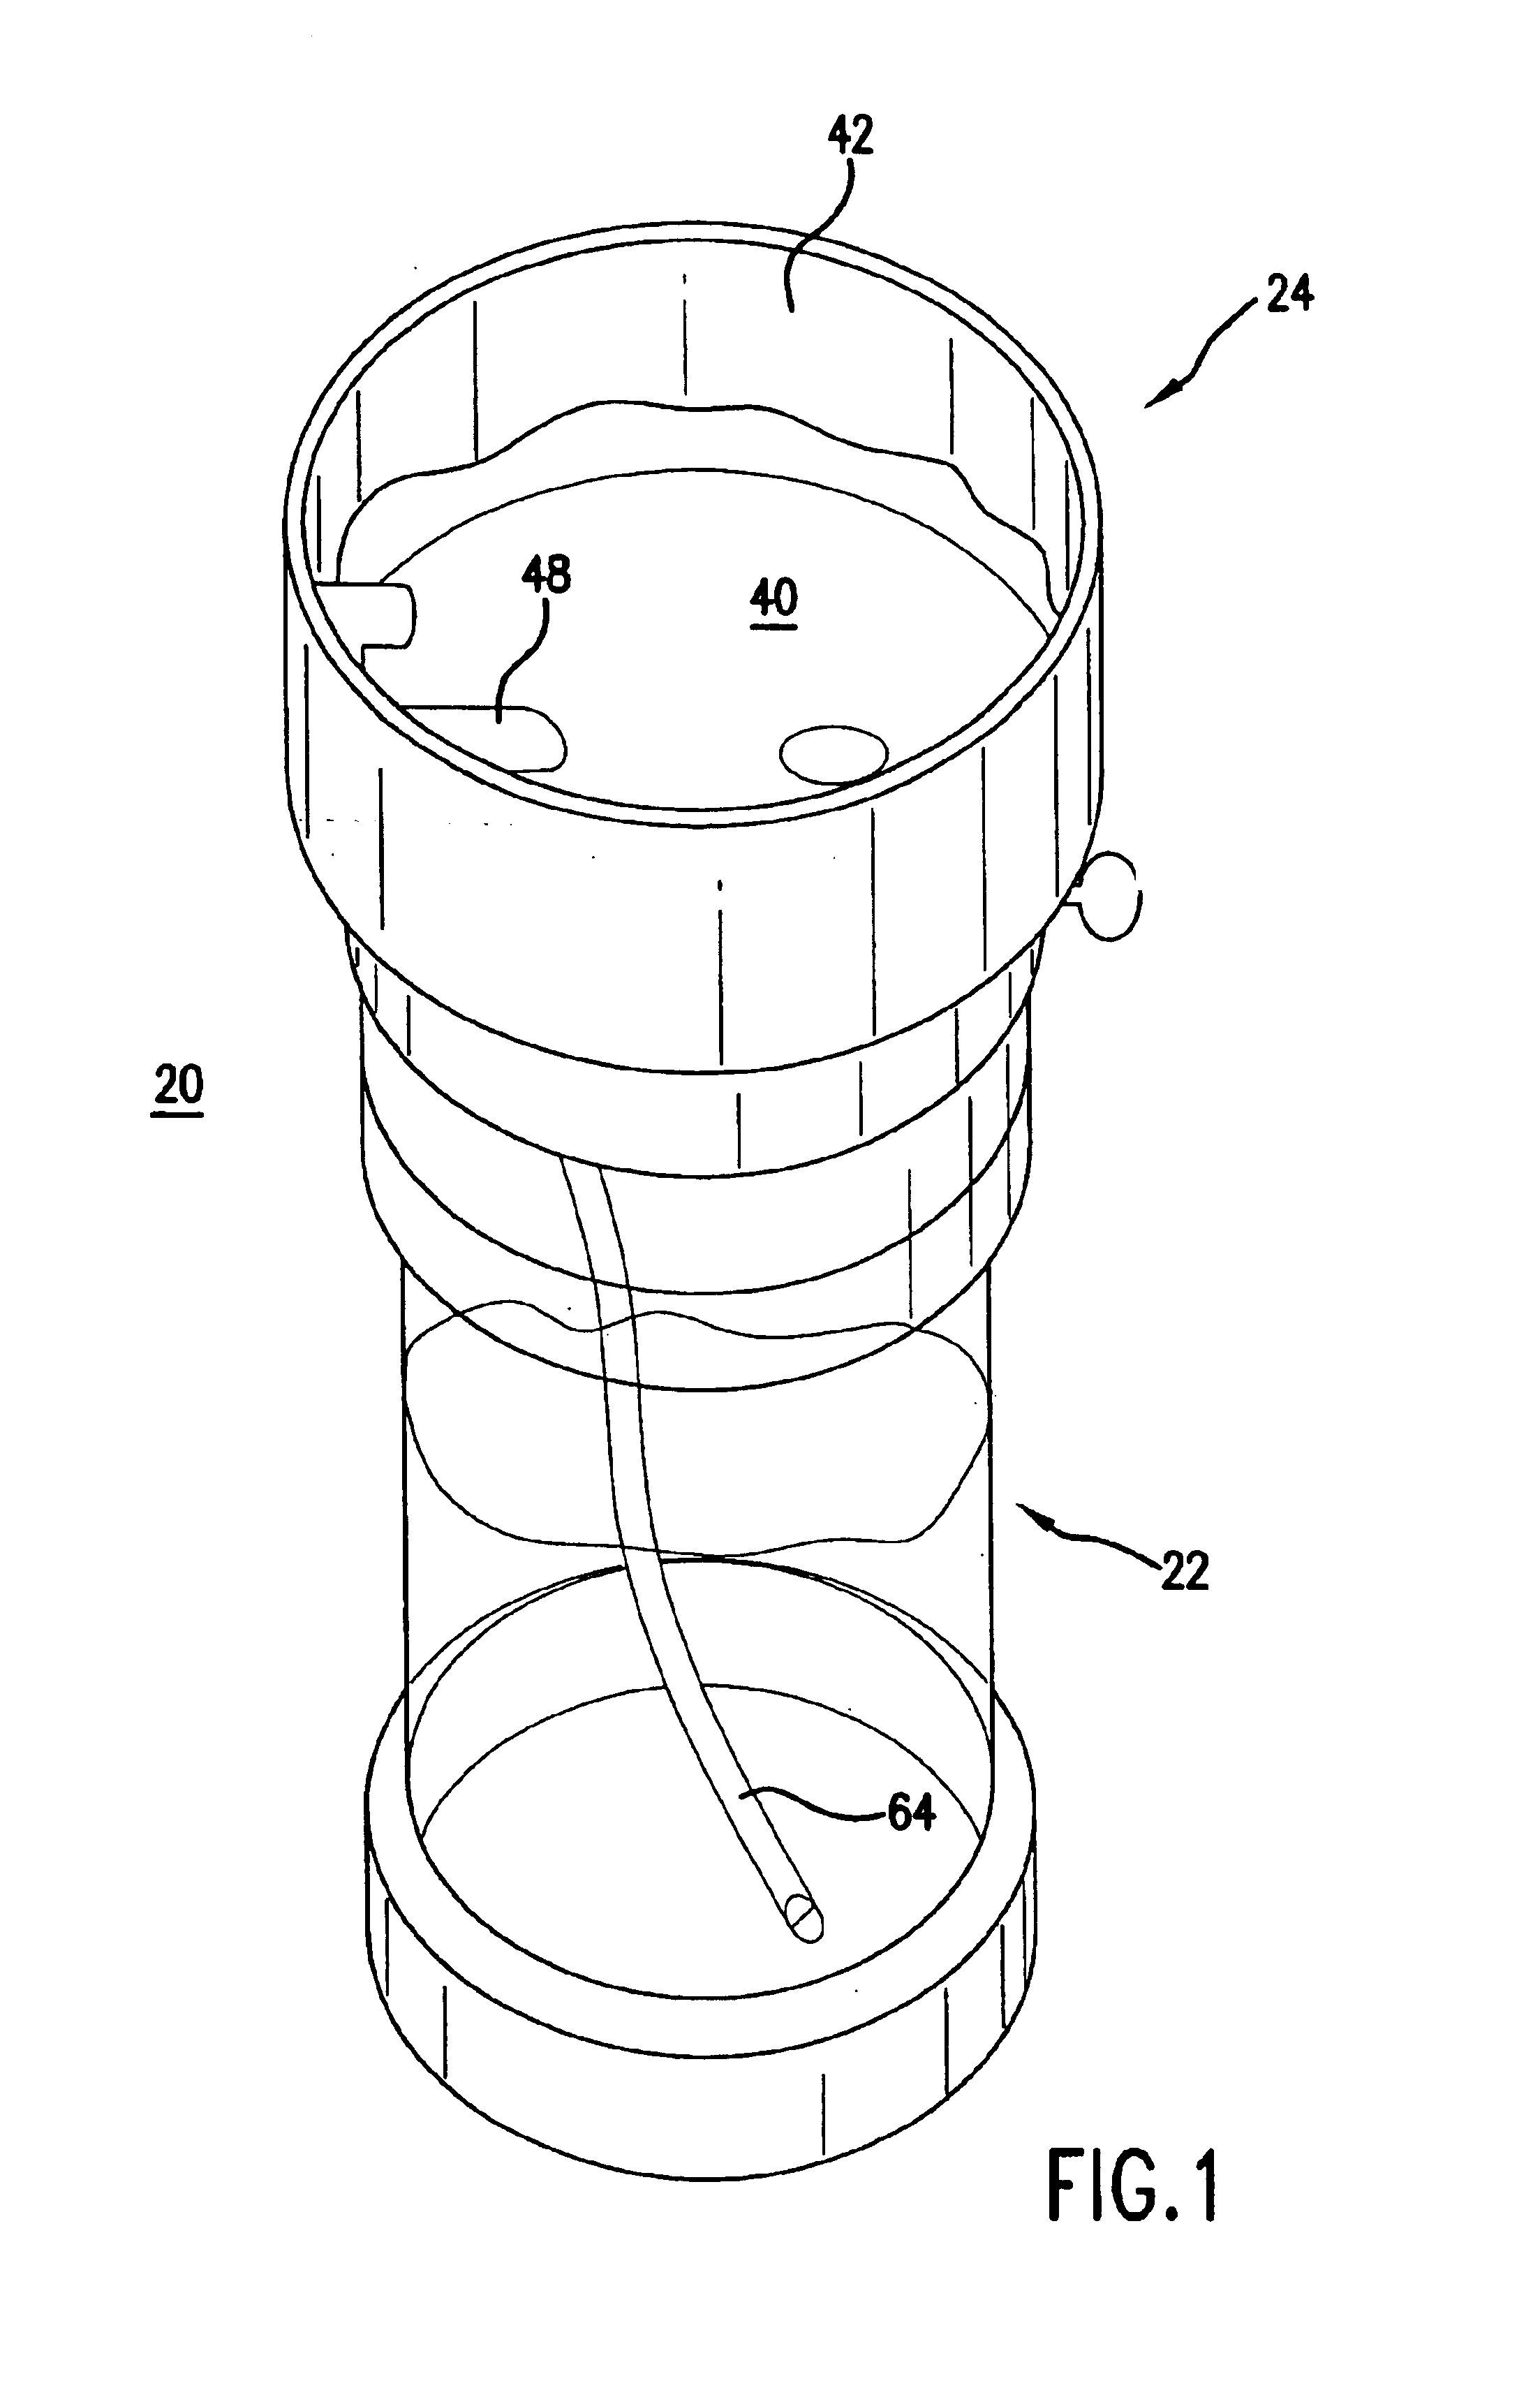 Apparatus and method for delivering bubble solution to a dipping container